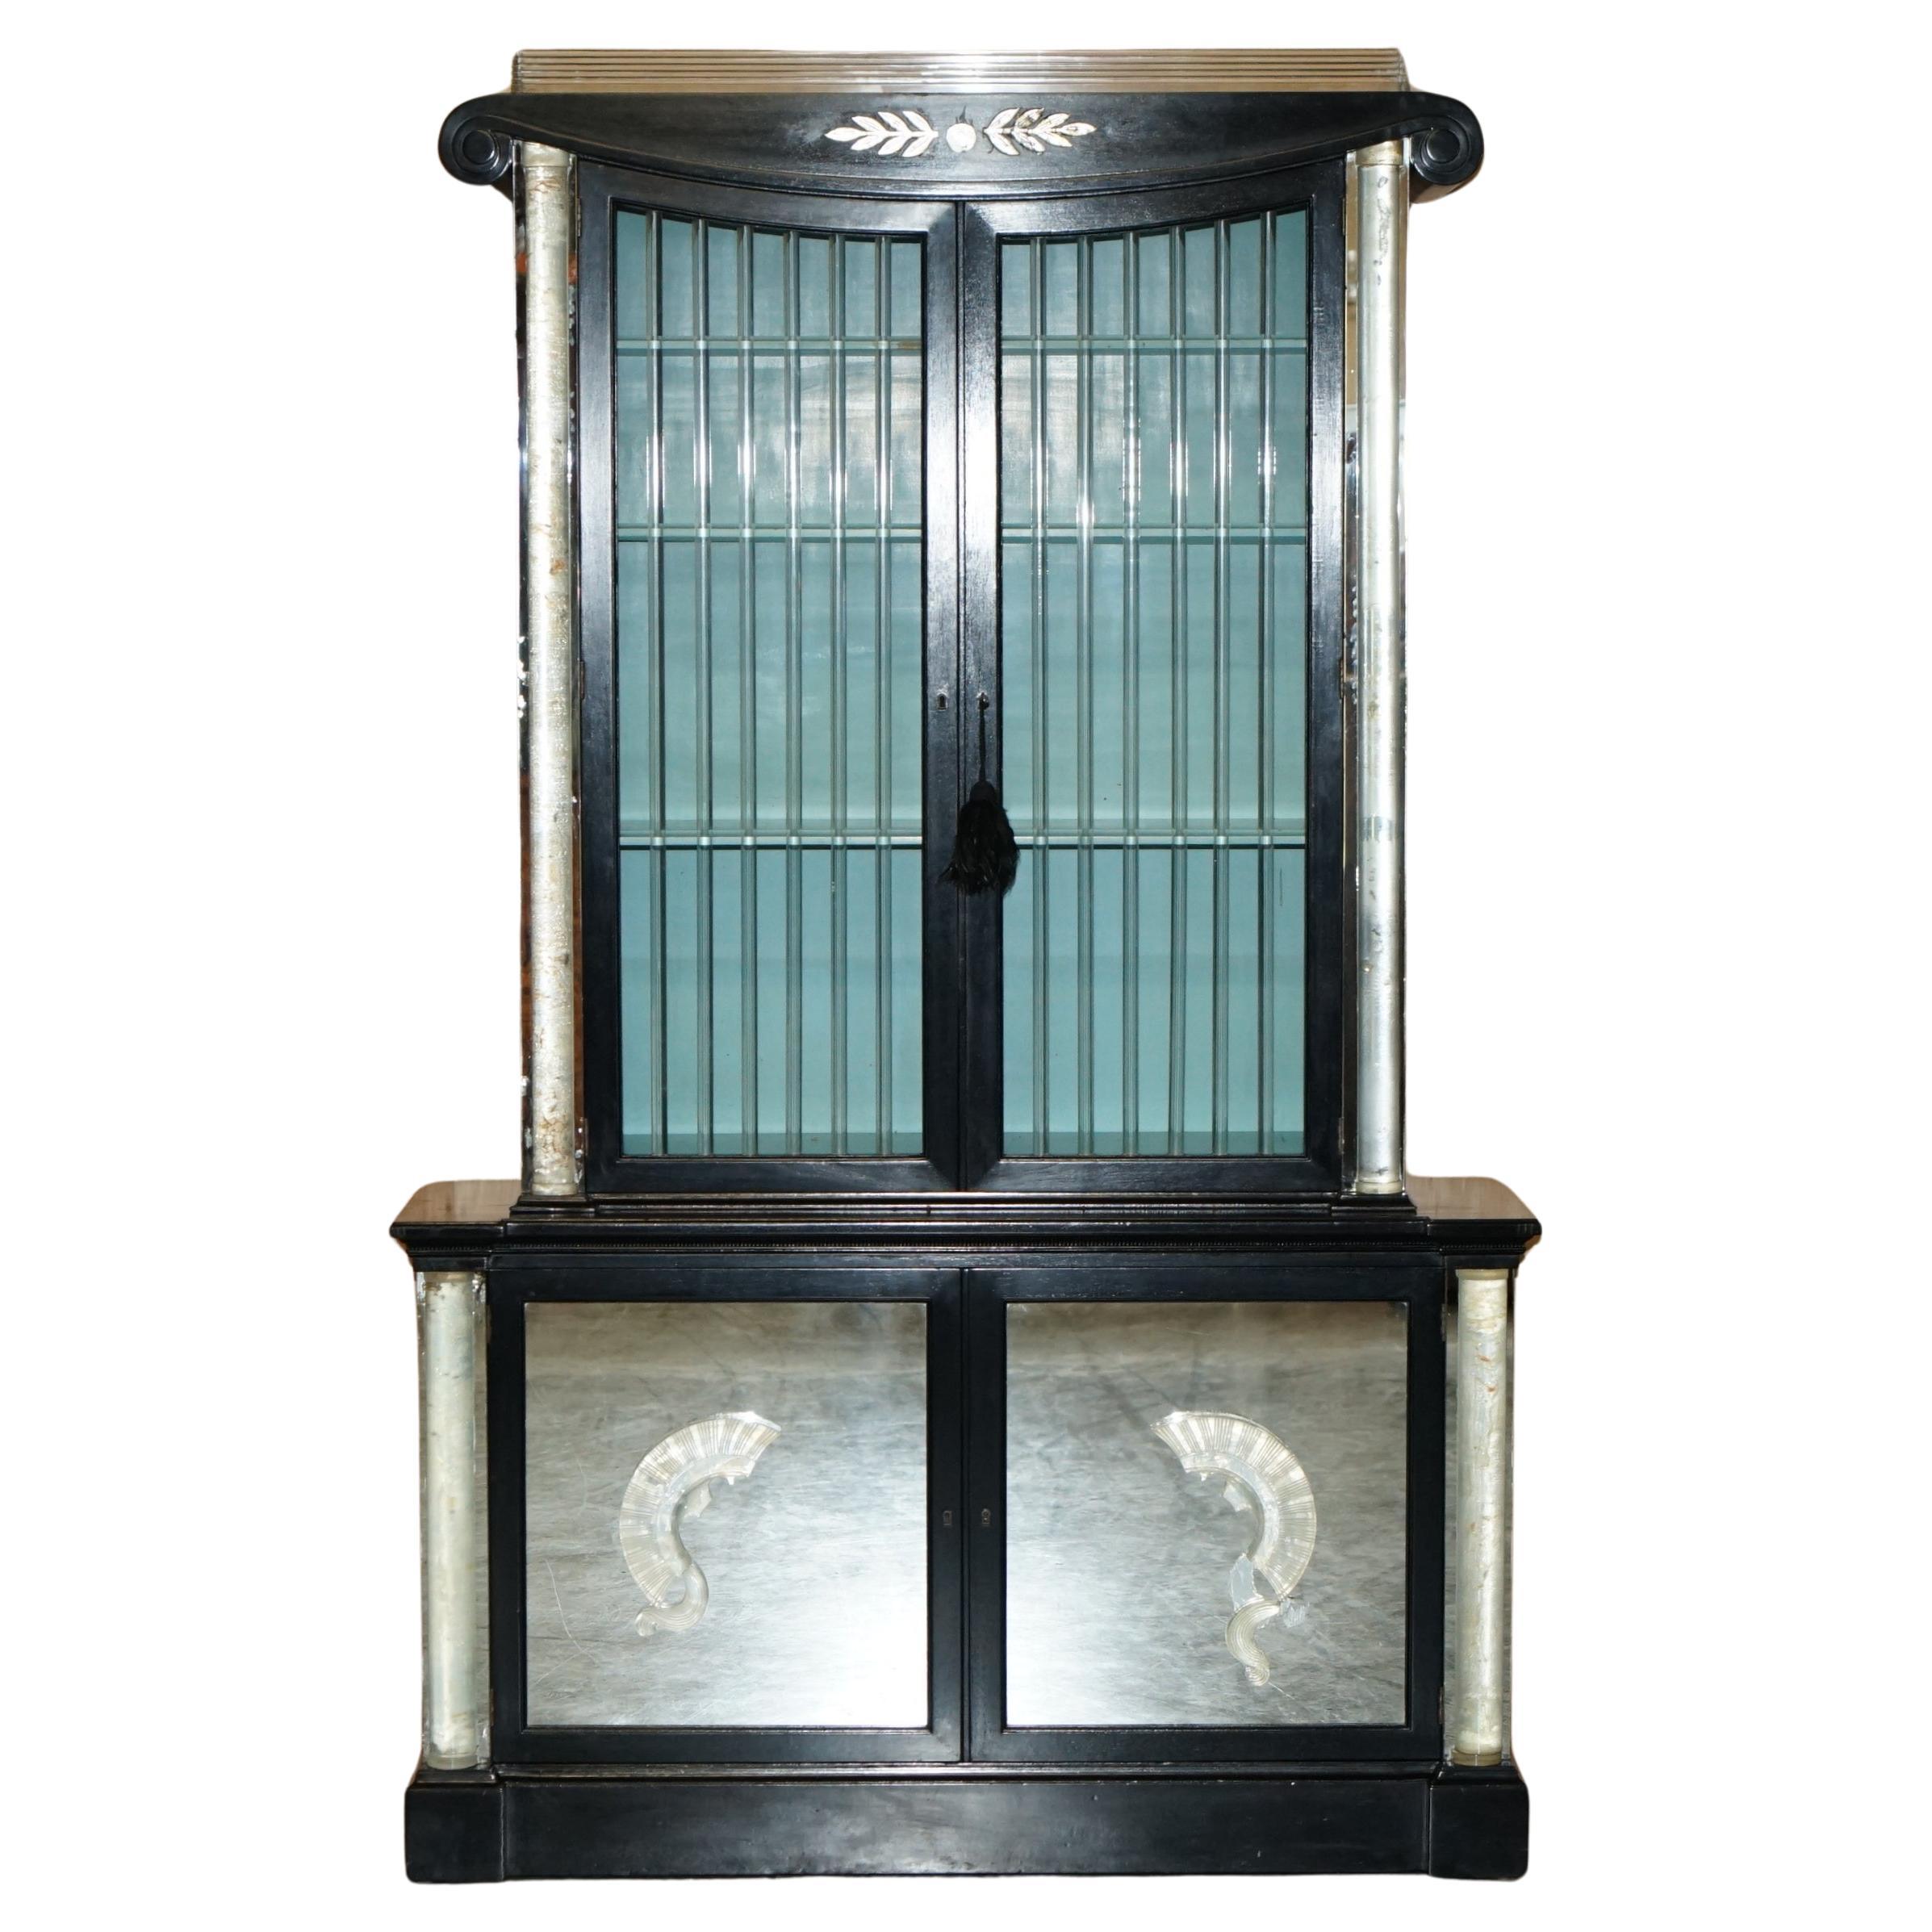 ORIGINAL ART DECO BOOKCASE CABiNET MADE BY LORIN JACKSON FOR GROSFELD HOUSE For Sale